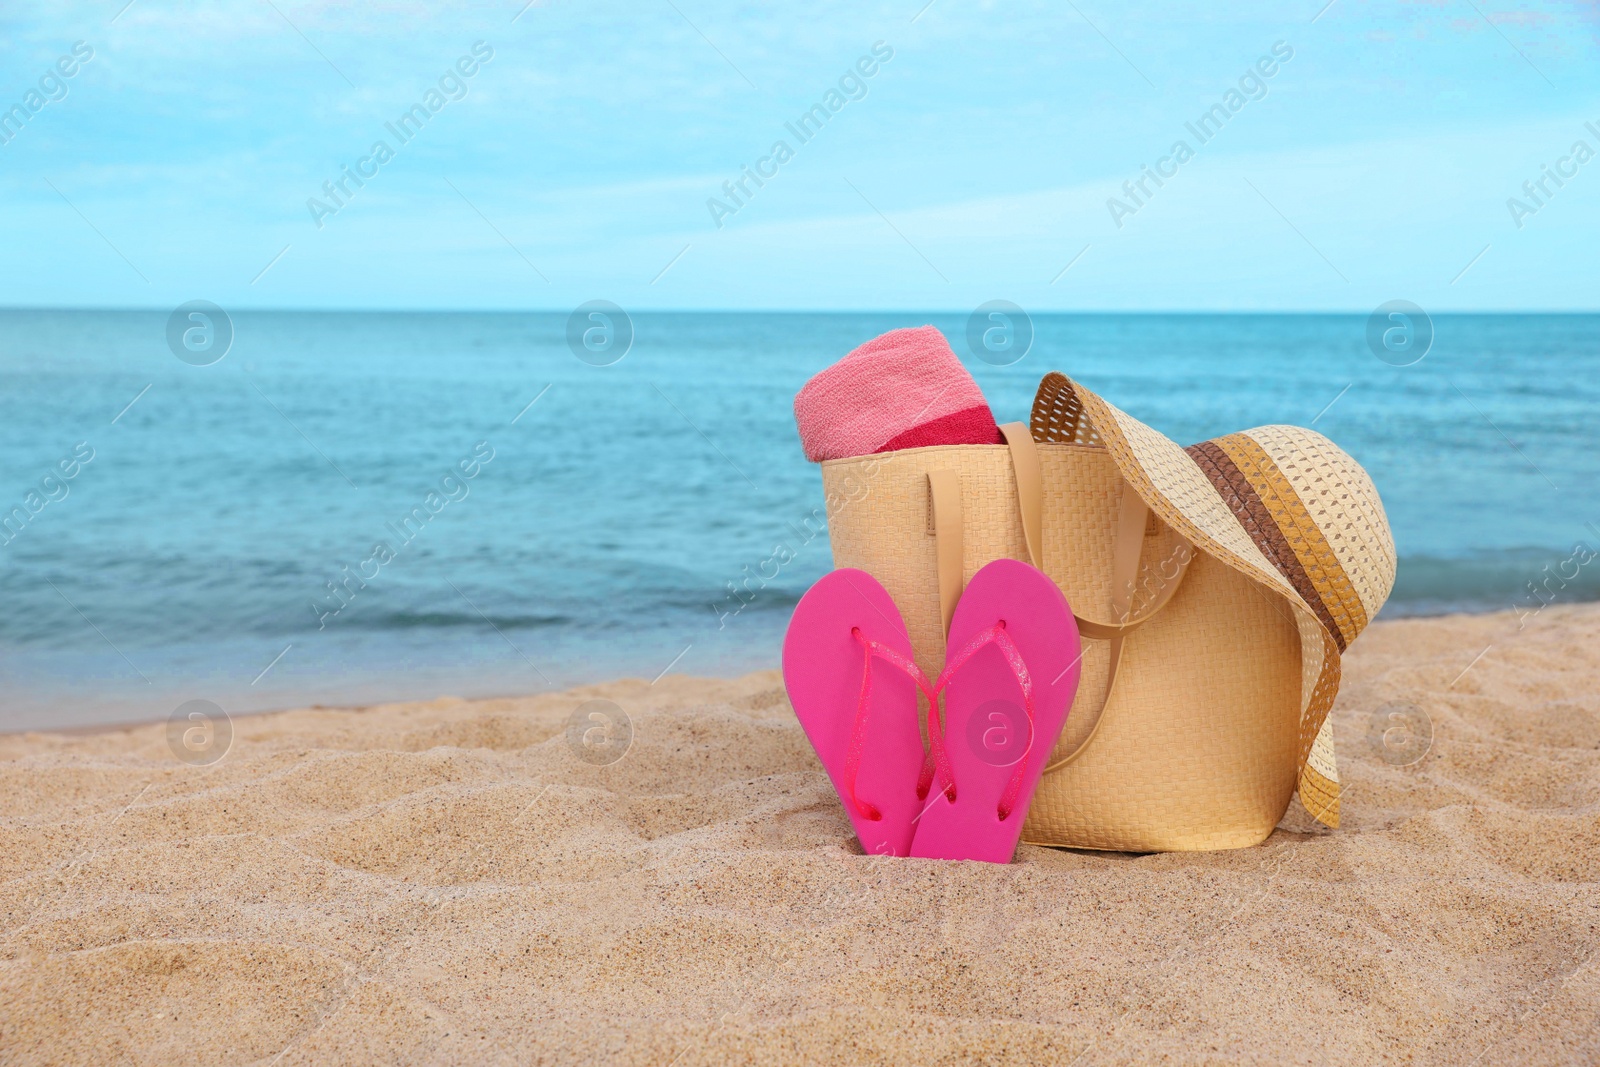 Photo of Summer bag with slippers, beach towel and straw hat on sand near sea, space for text